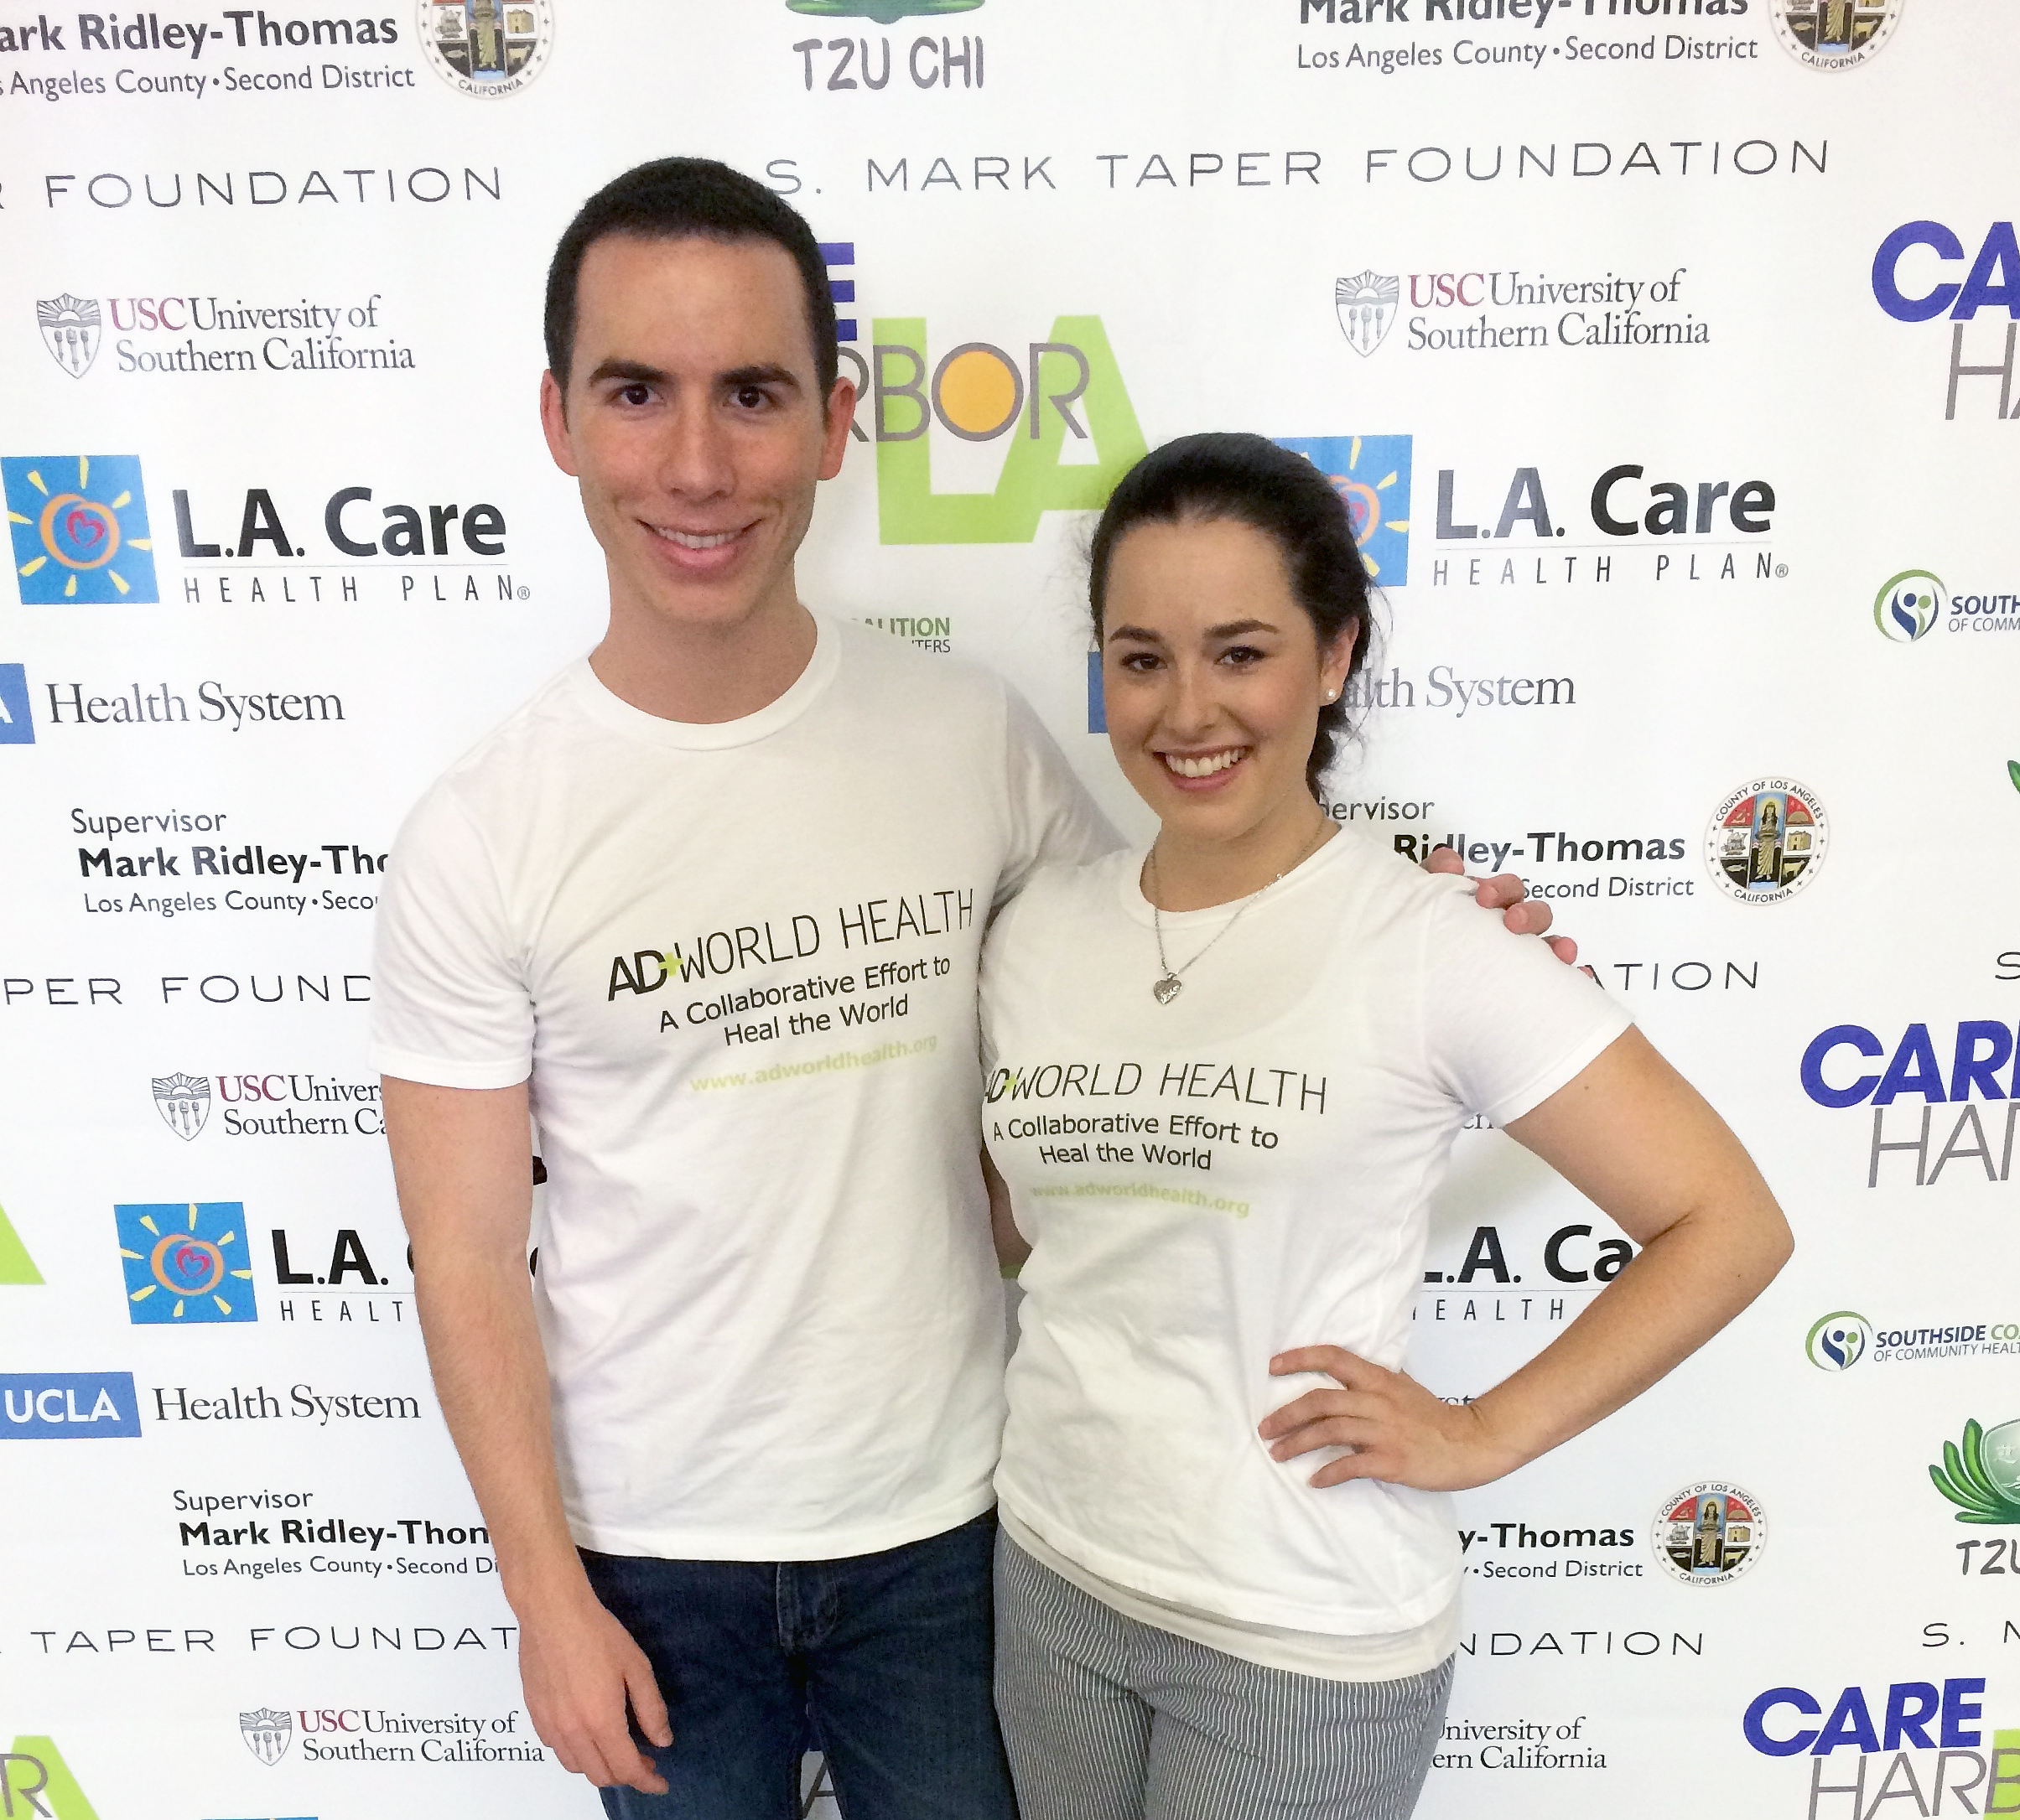 At the Care Harbor 2014 Event